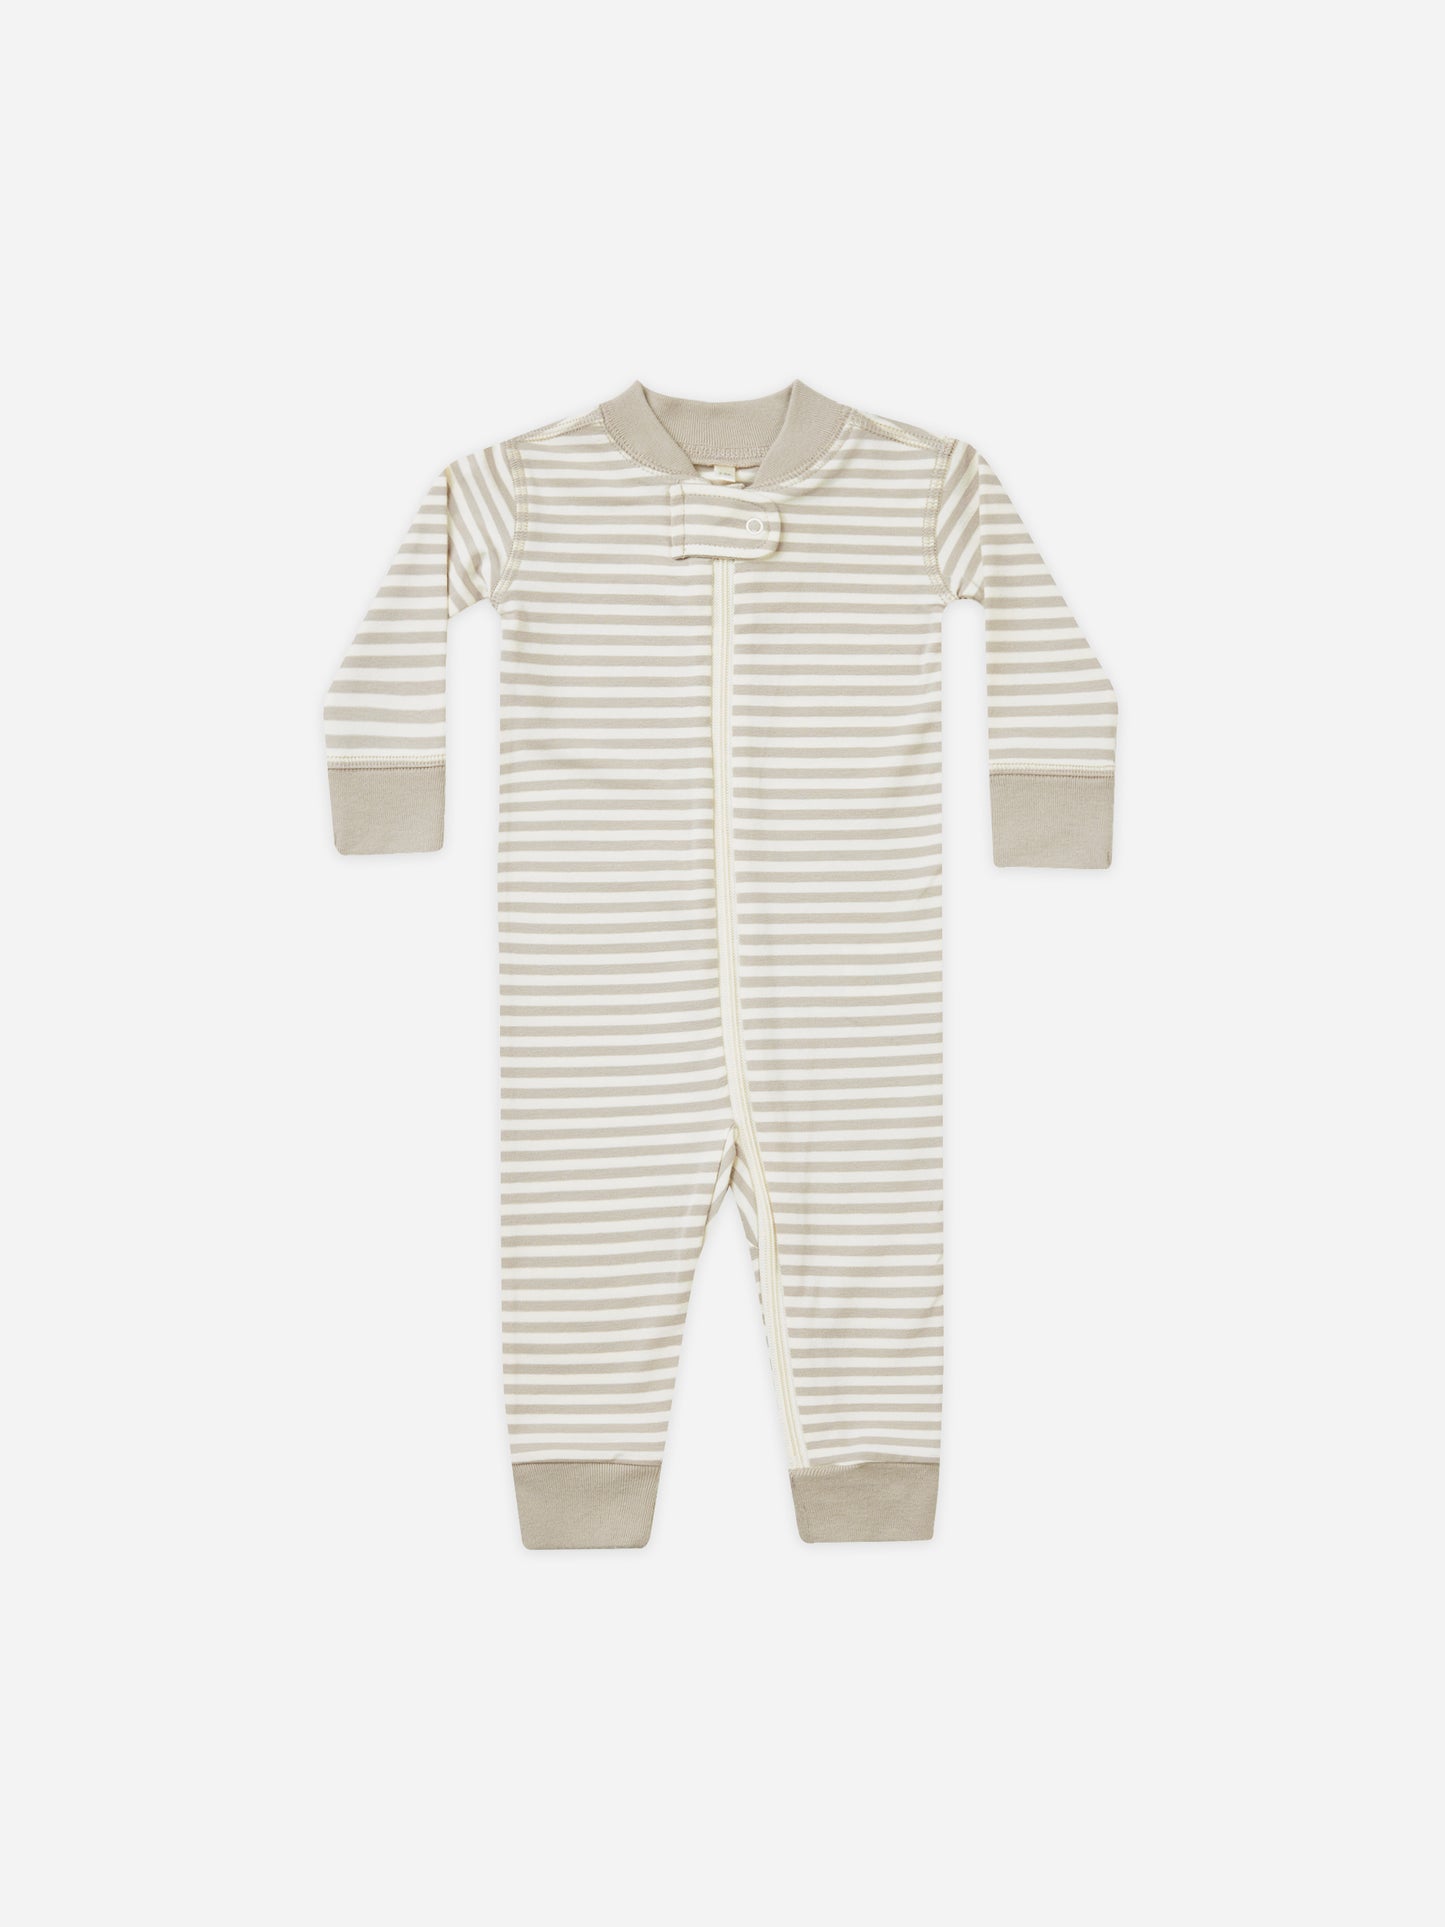 Zip Long Sleeve Sleeper || Ash Stripe - Rylee + Cru | Kids Clothes | Trendy Baby Clothes | Modern Infant Outfits |